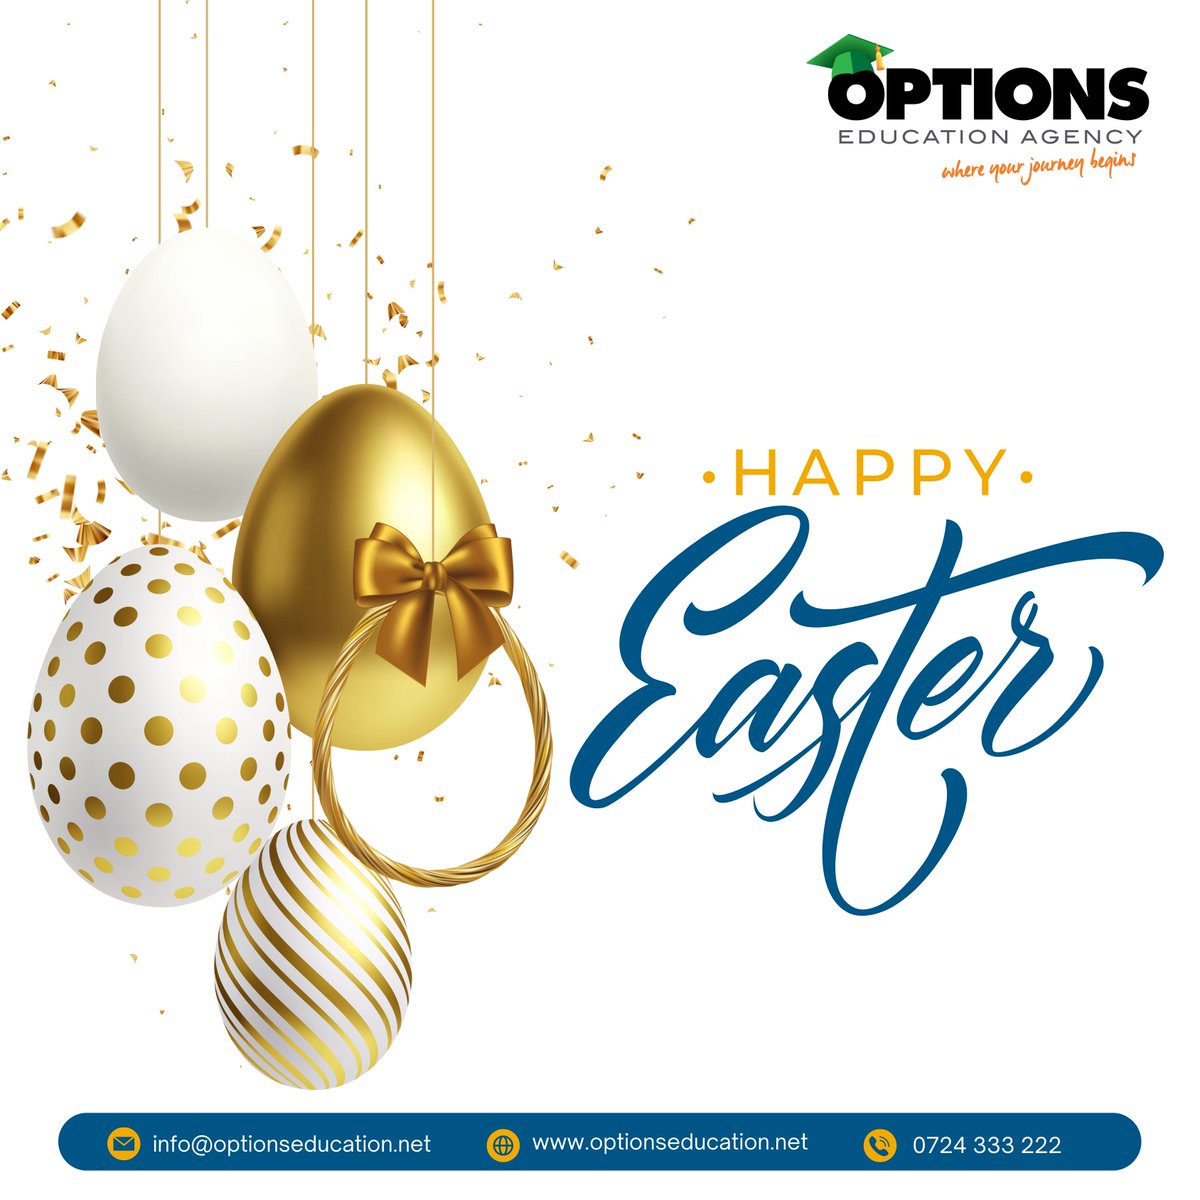 Wishing you an egg-ceptional Easter filled with joy and success! Happy Easter! #Easter